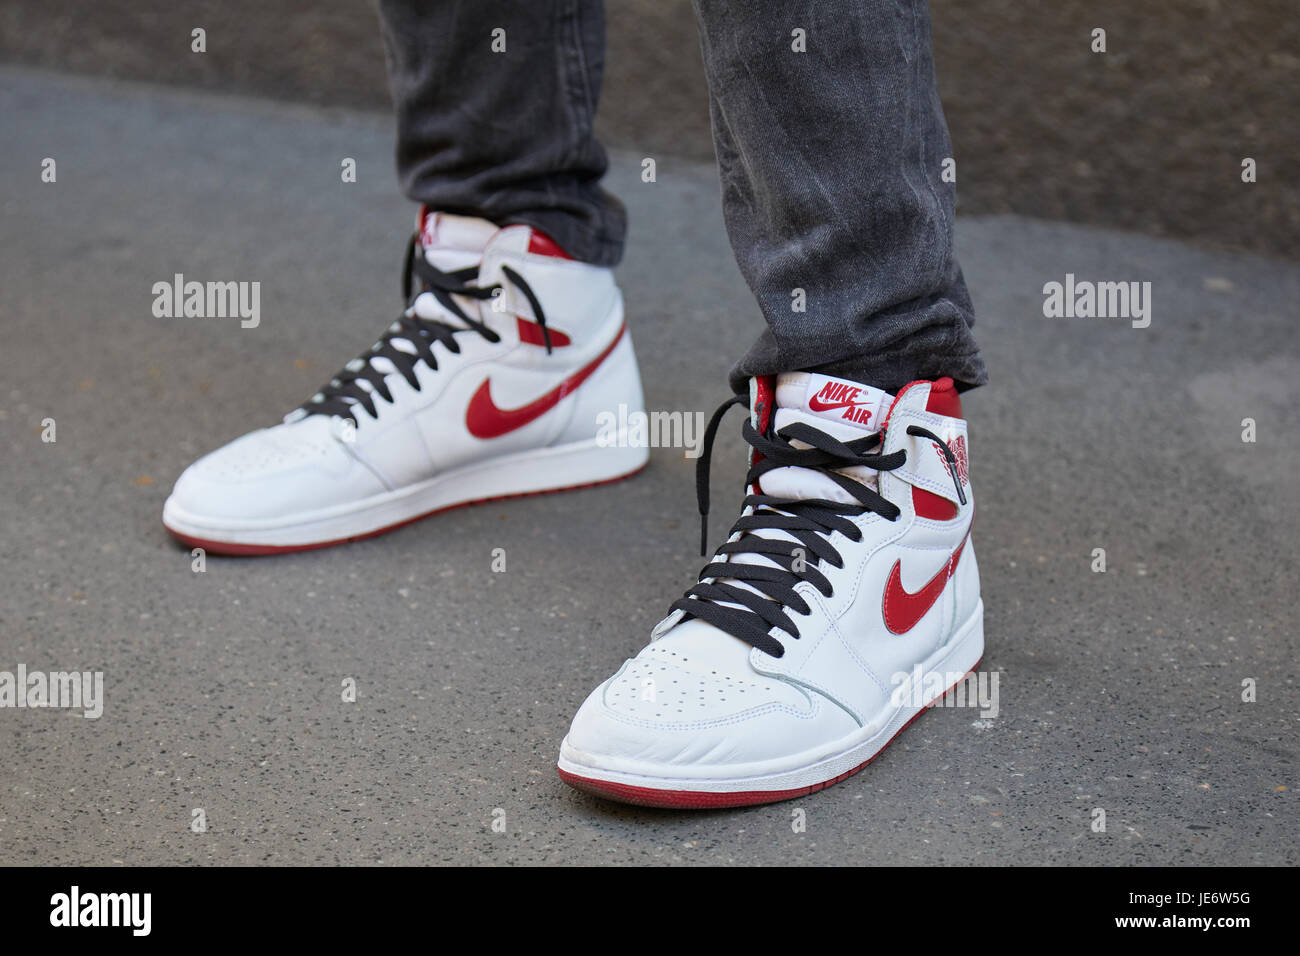 MILAN - JUNE 17: Man with white and red Nike air sneakers before Les Hommes  fashion show, Milan Fashion Week street style on June 17, 2017 in Milan  Stock Photo - Alamy